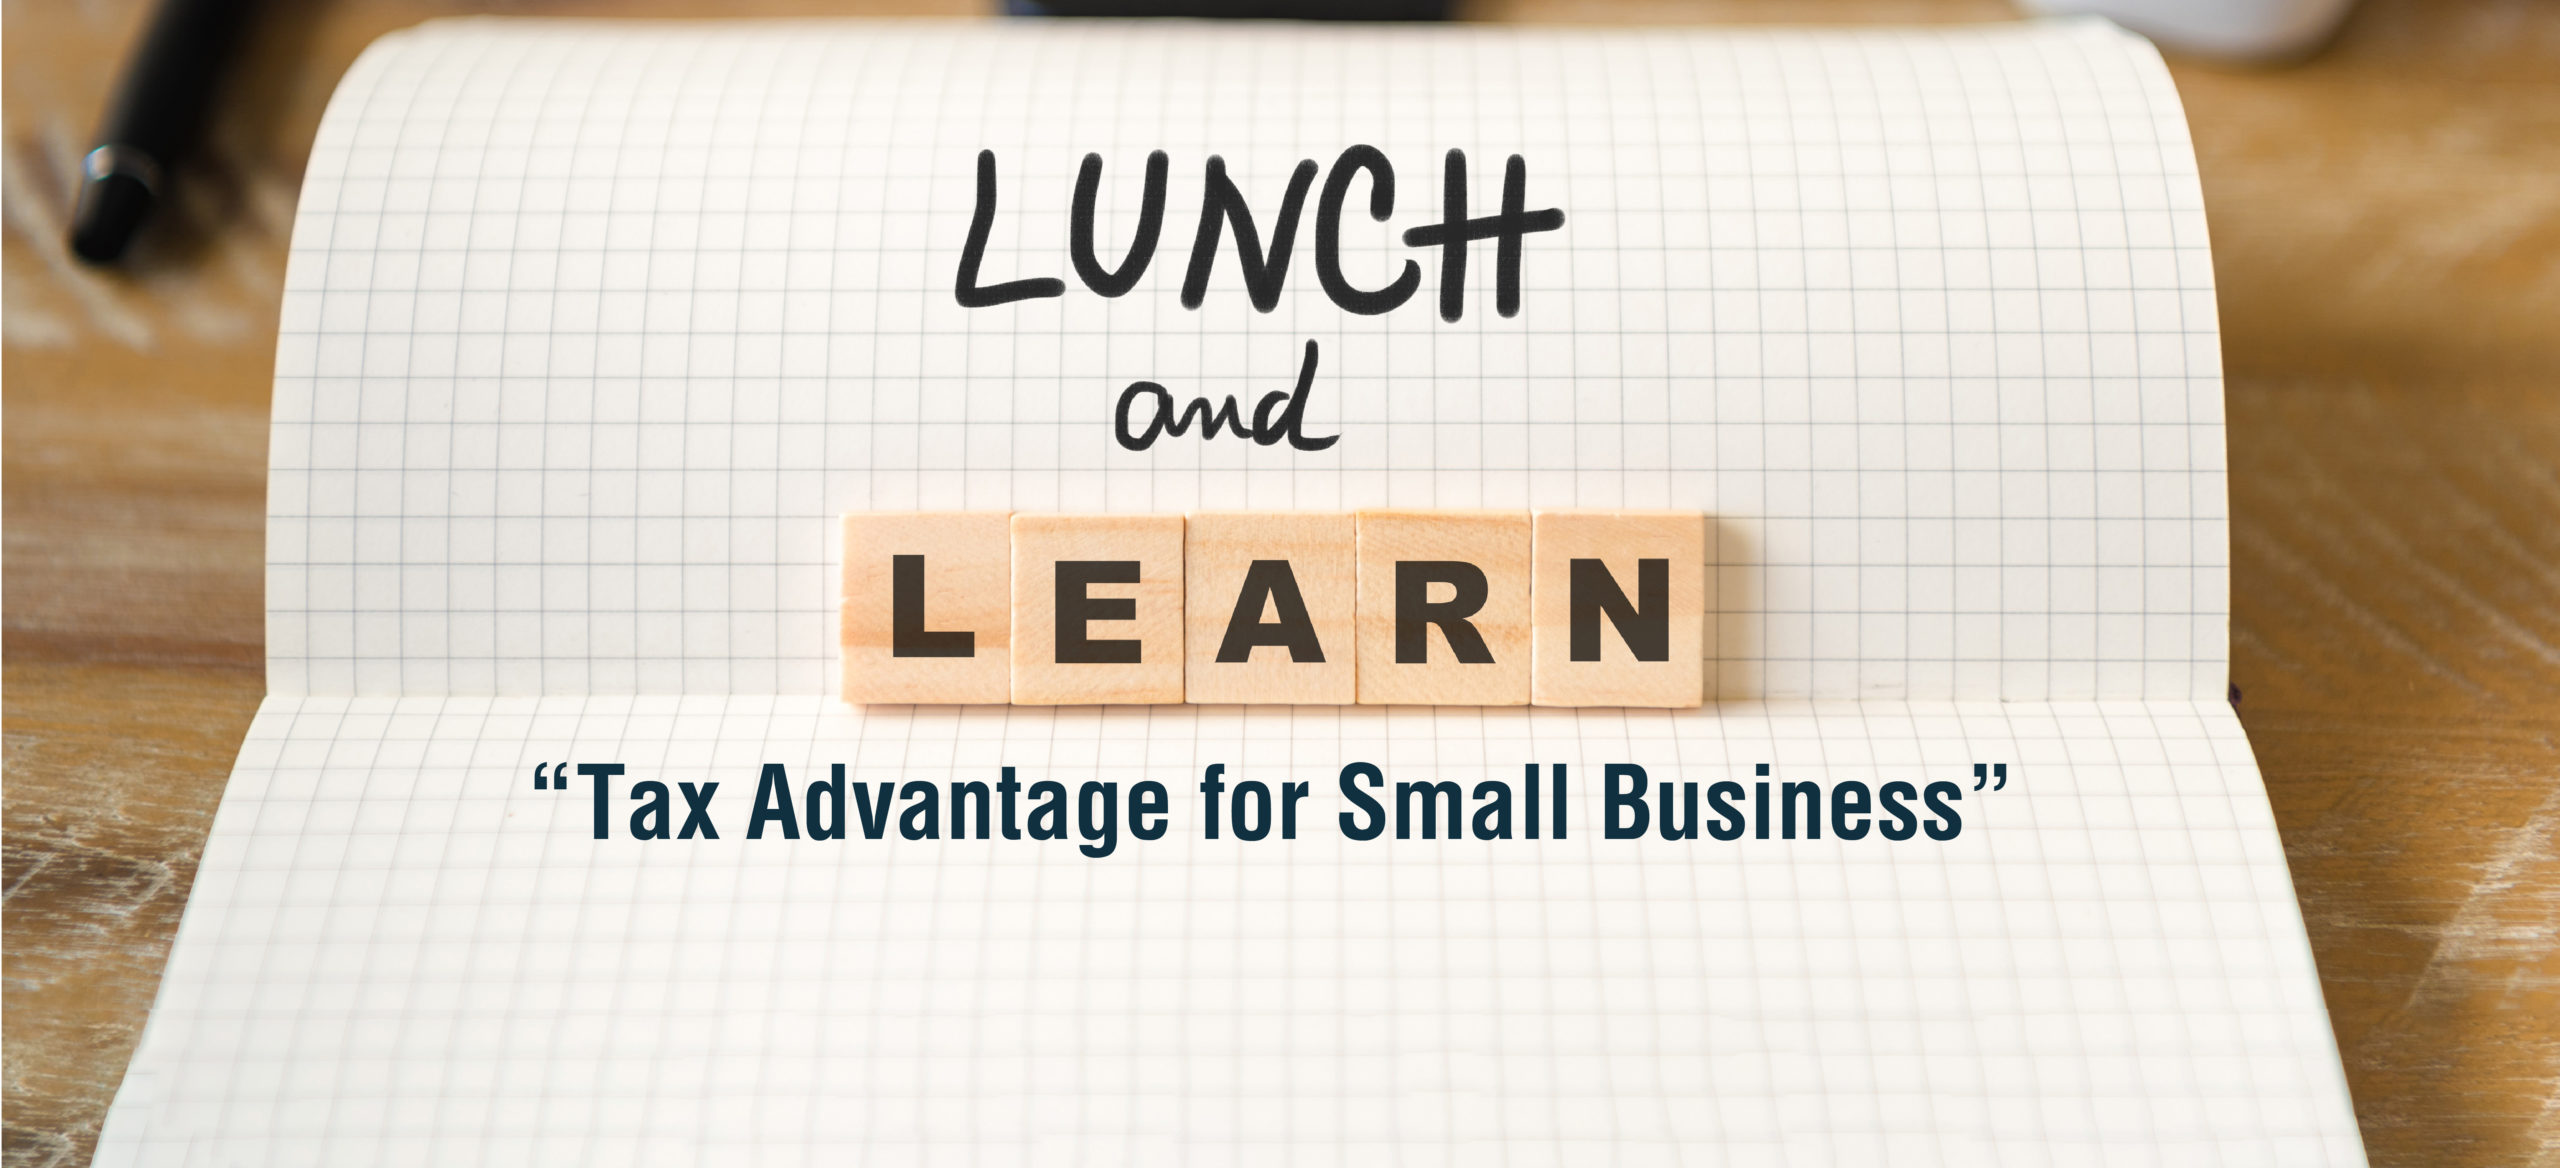 Lunch and Learn - Tax Advantage for Small Business